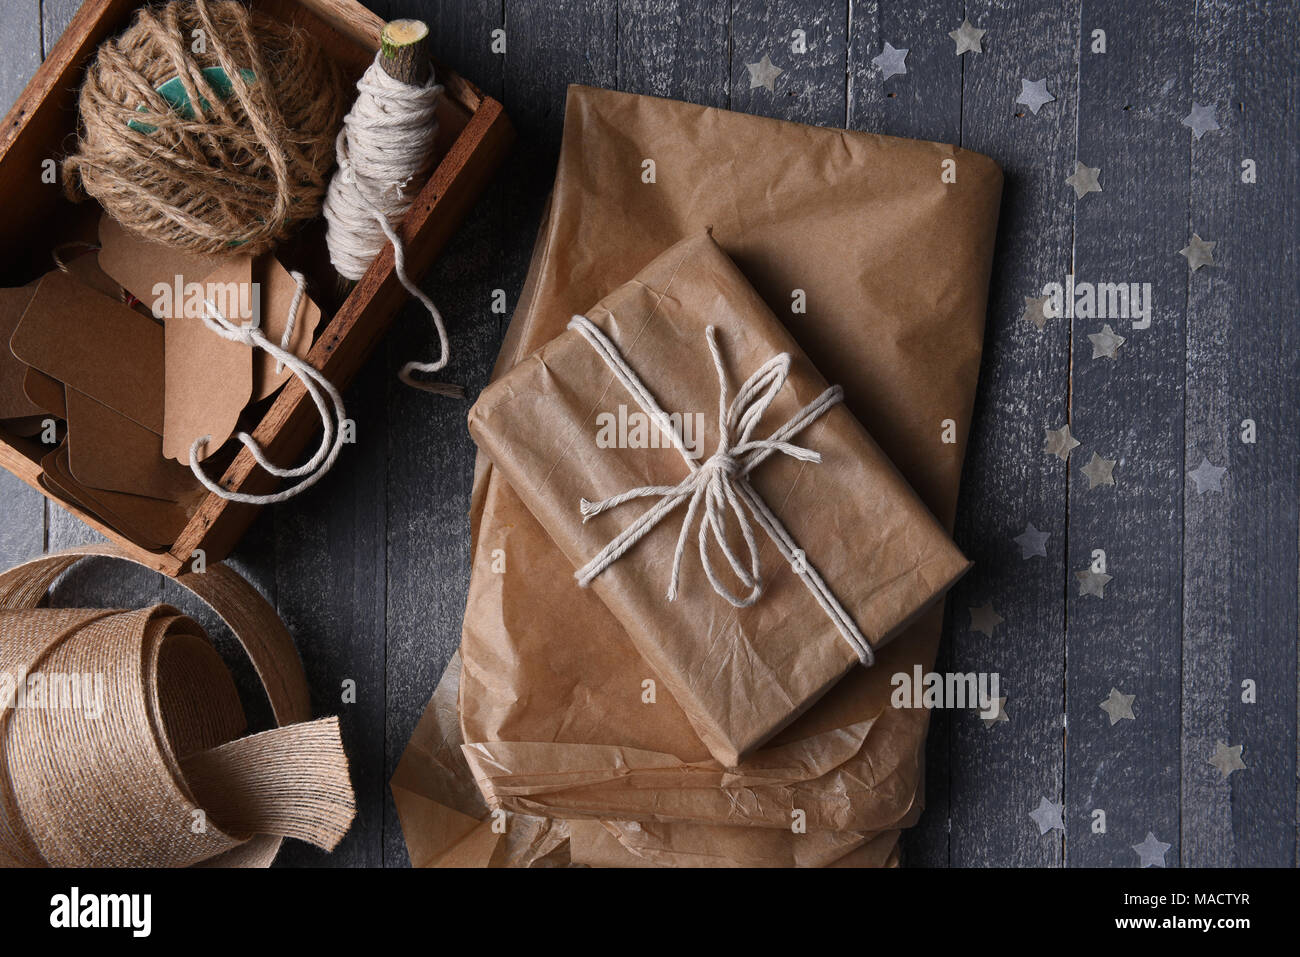 High angle shot of plain brown paper gift wrapping supplies with paper stars. Stock Photo